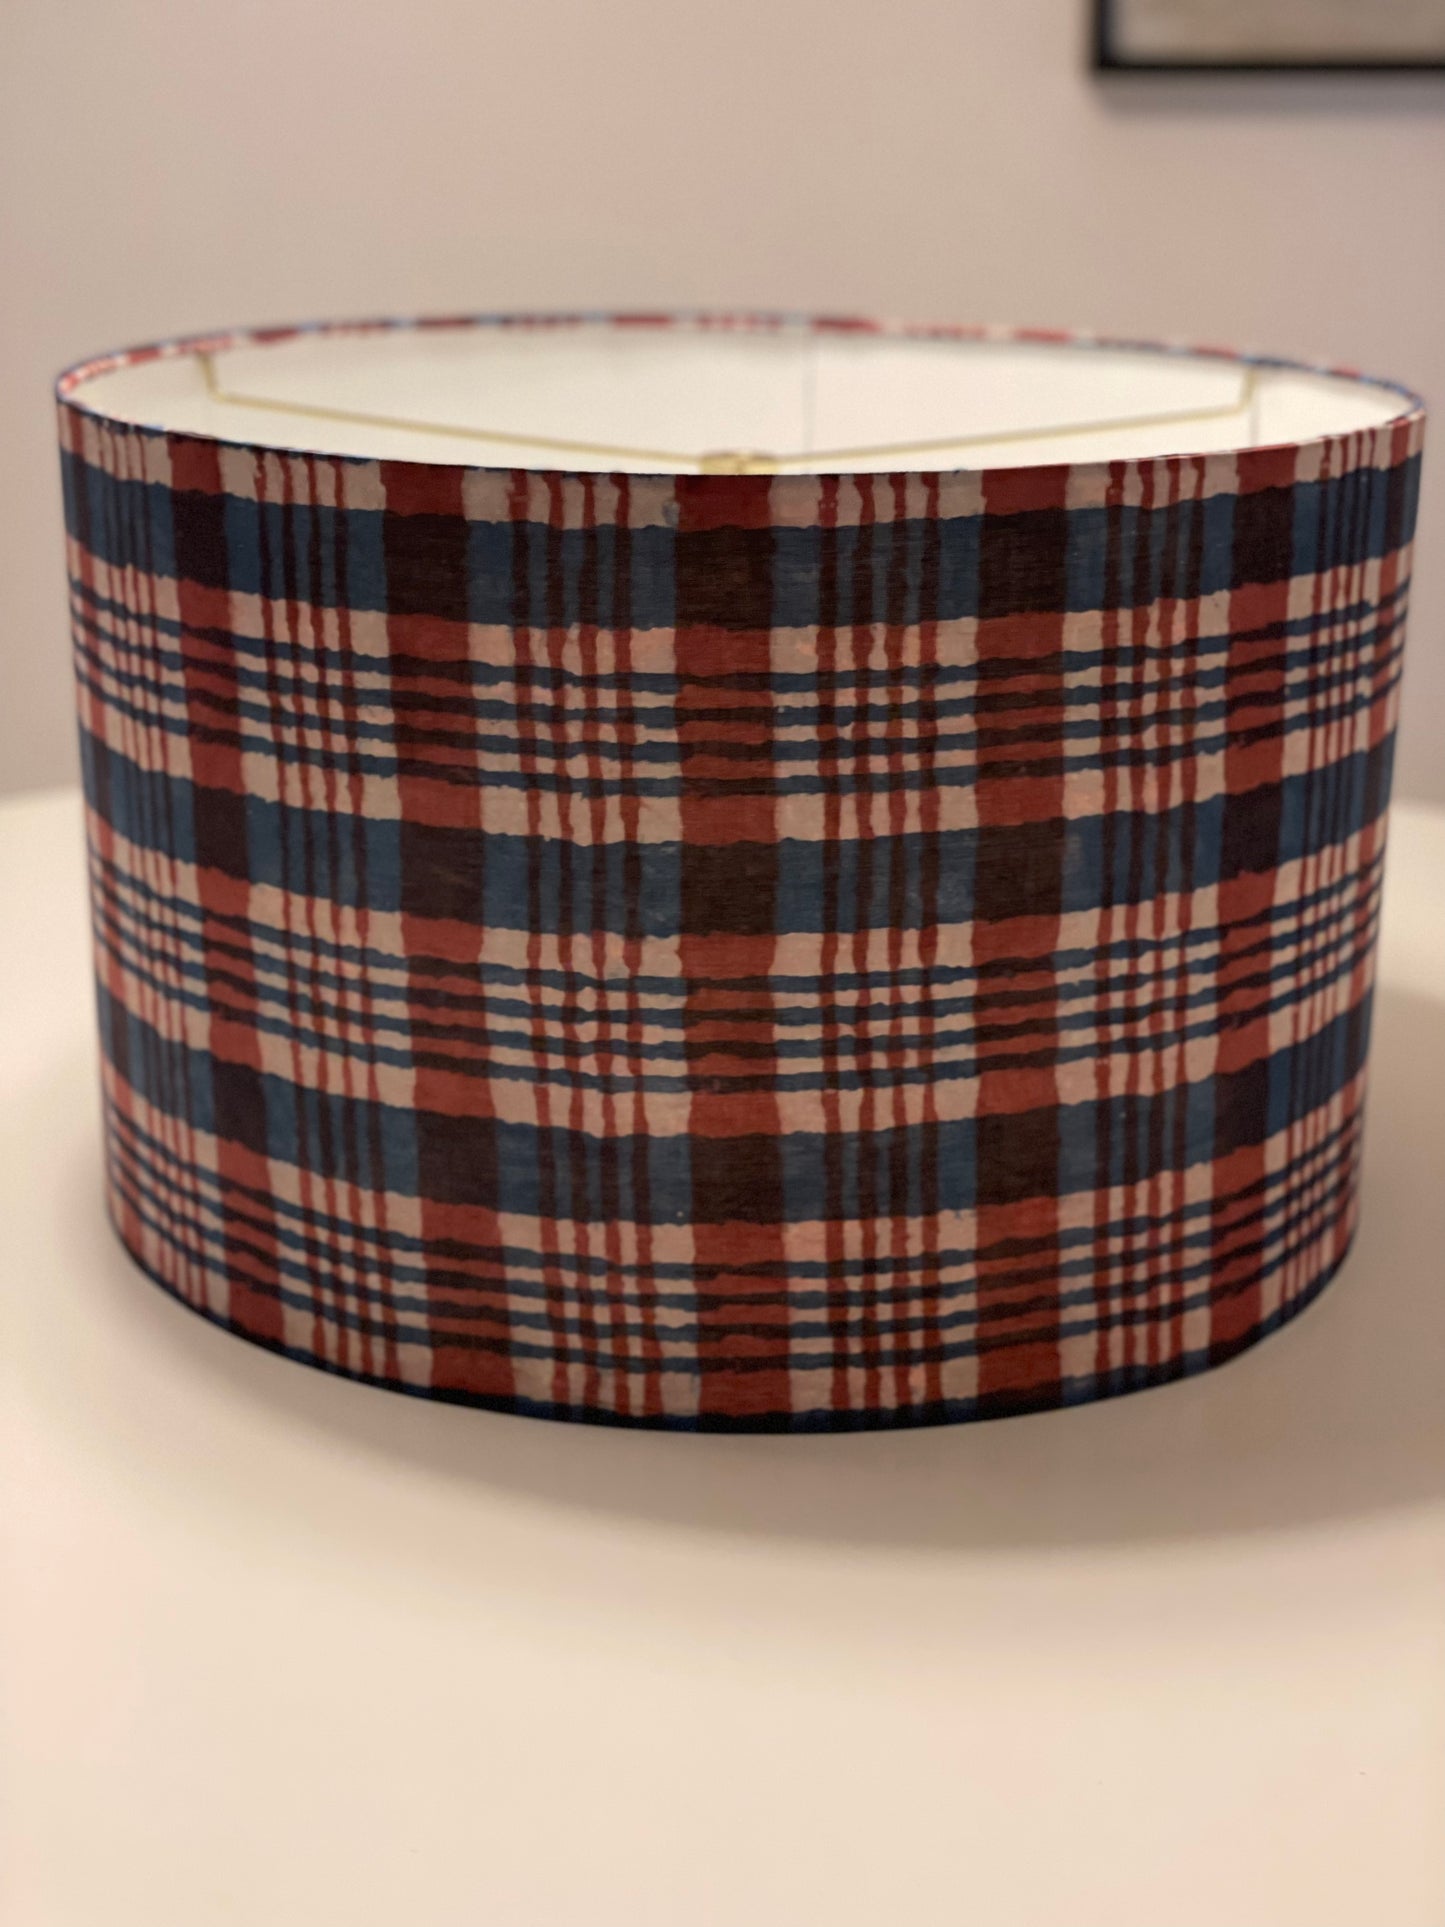 16 Inch Drum Lampshade. Indigo Hand Batik from India. Indigo, Faded Red, and Pale Taupe Plaid.